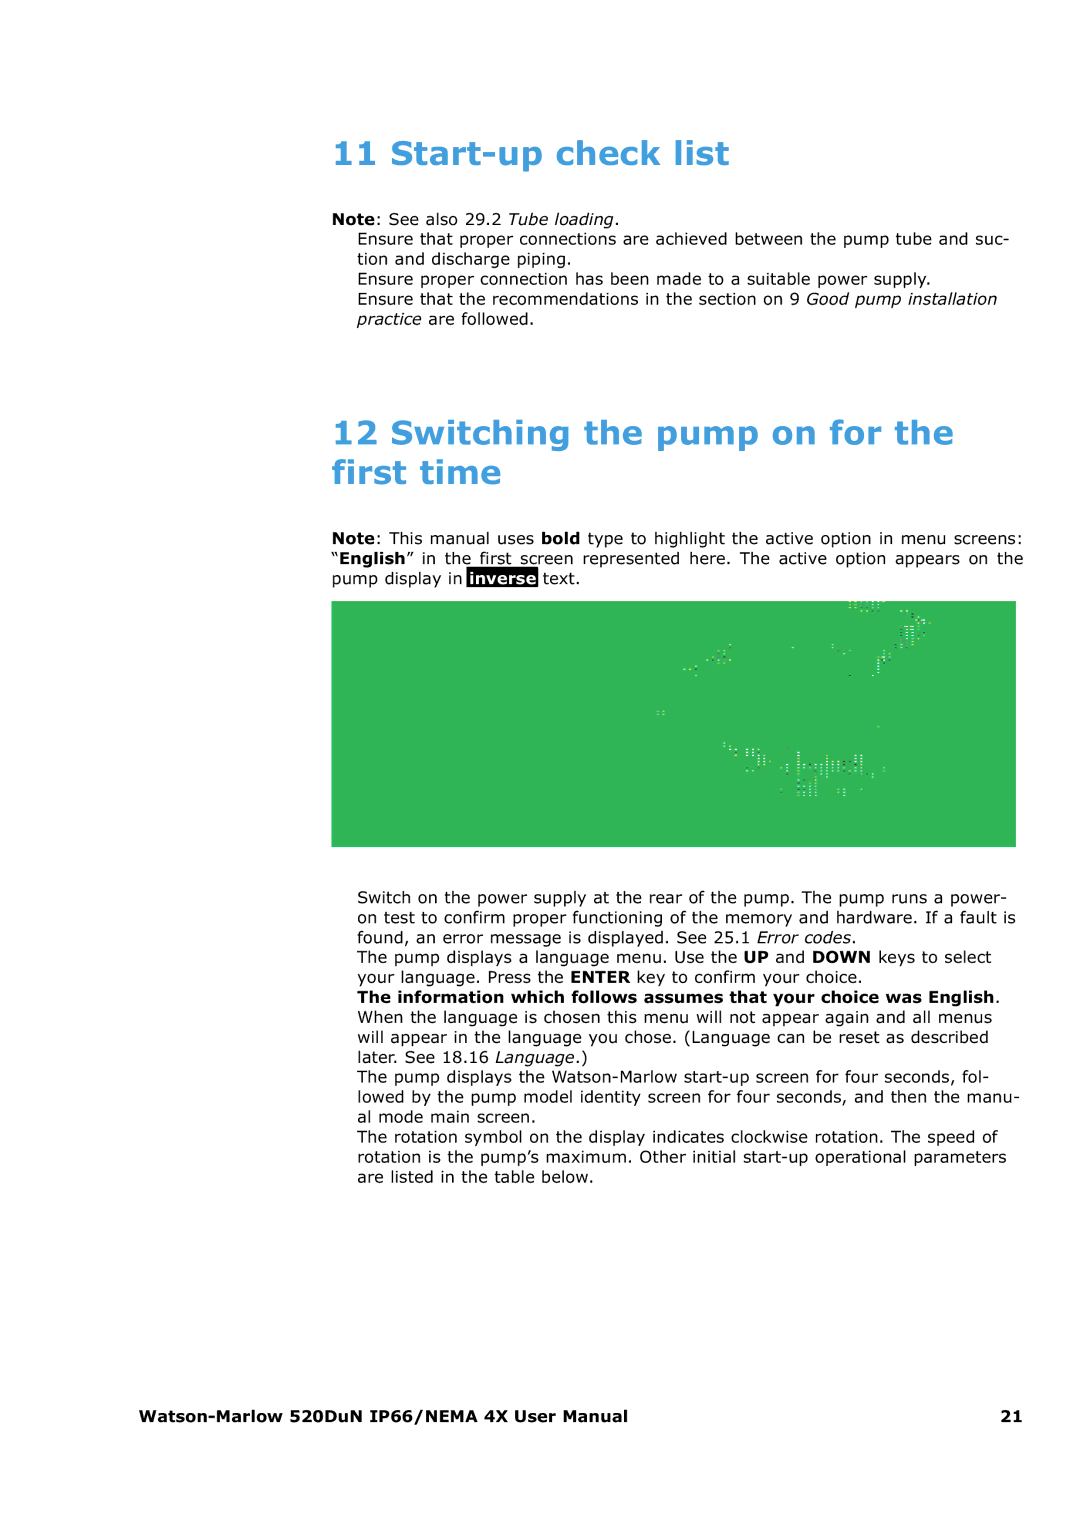 Watson & Sons 520DUN user manual Start-up check list, Switching the pump on for the first time 